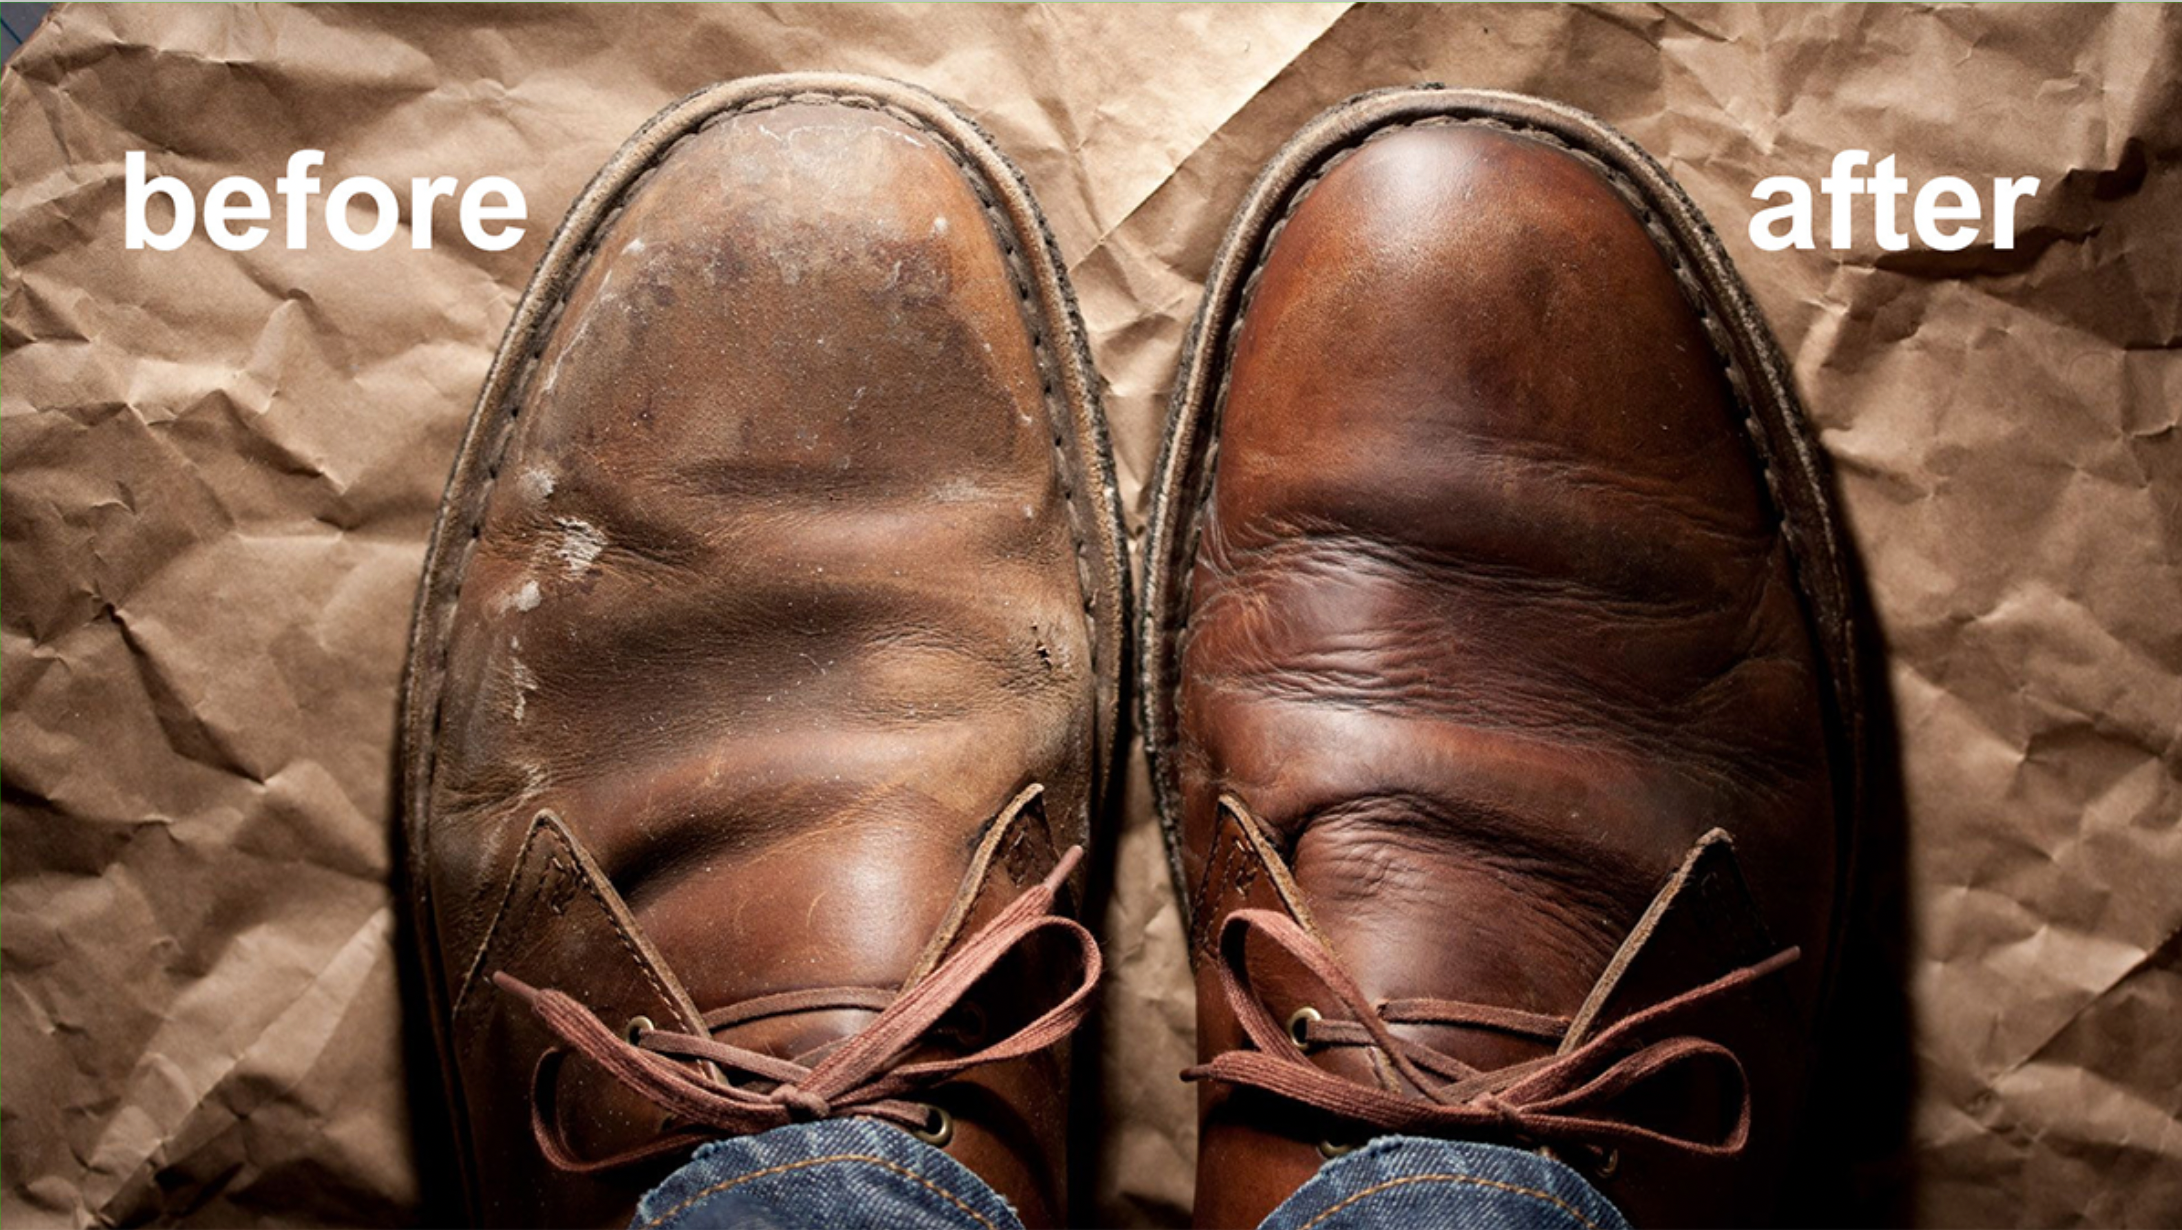 STOP Ruining Your Boots With Saddle Soap  How to Clean and Condition Leather  Boots The Right Way! 